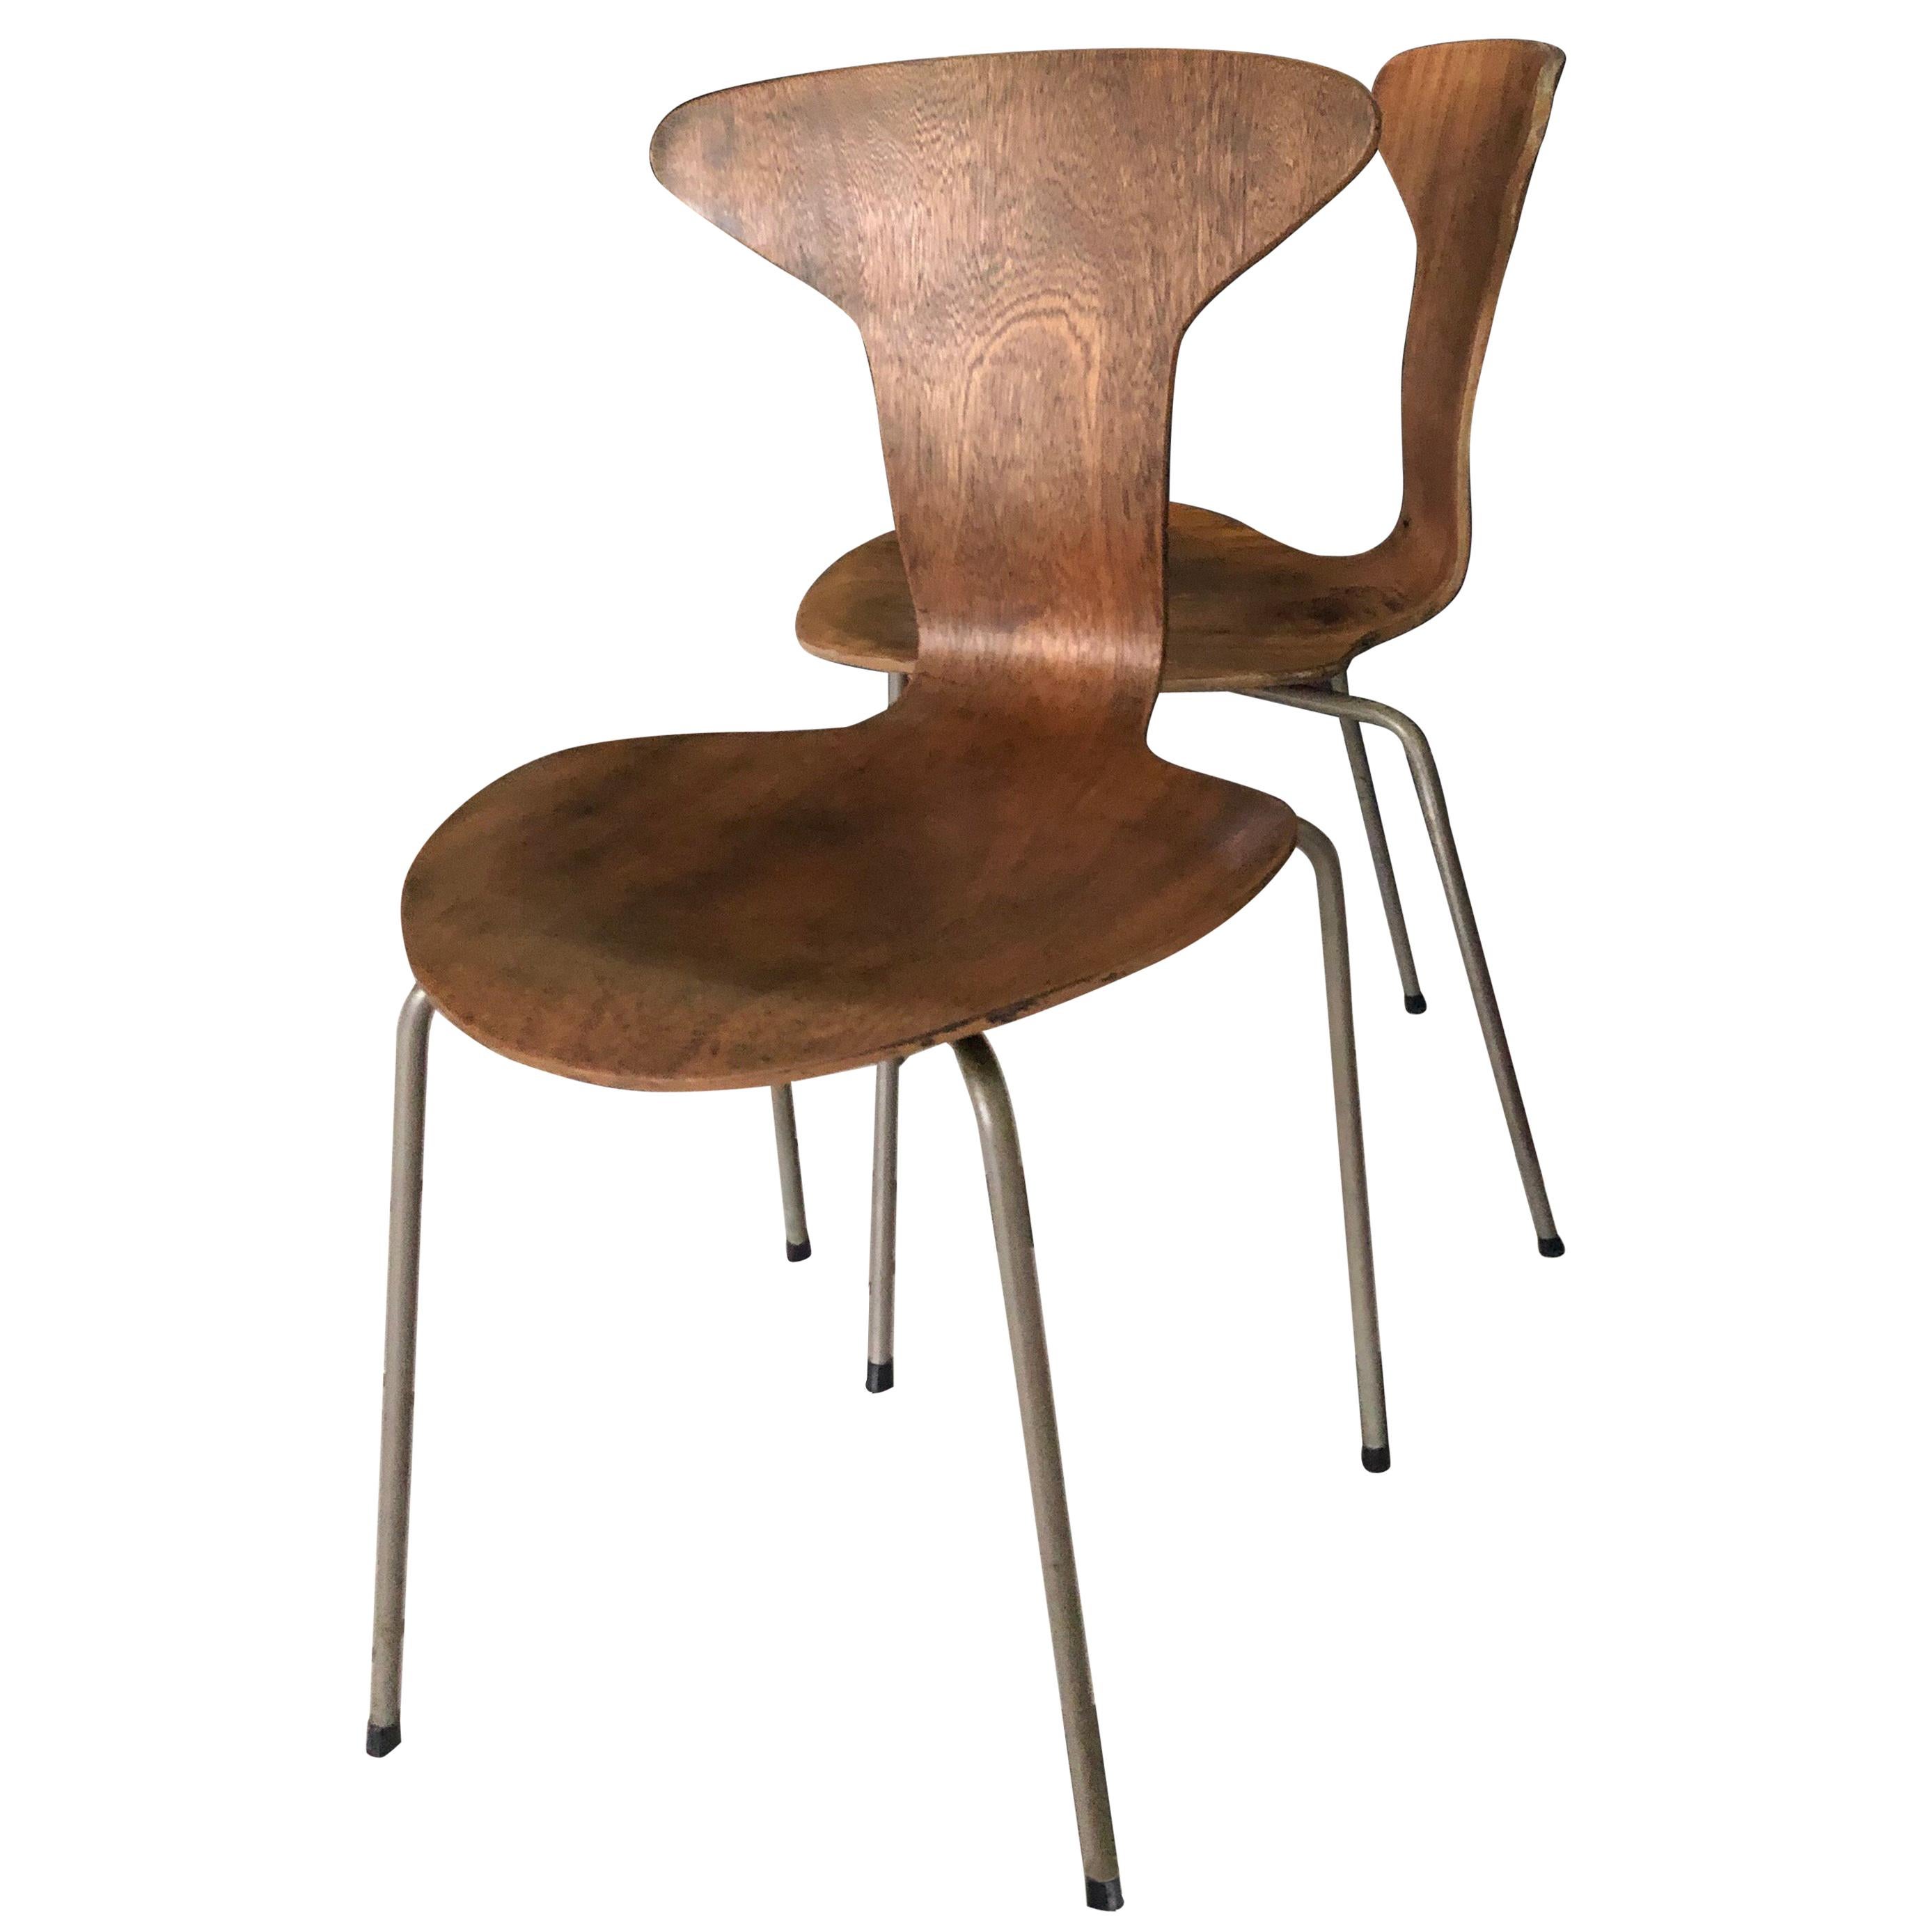 Mosquito Chairs by Arne Jacobsen